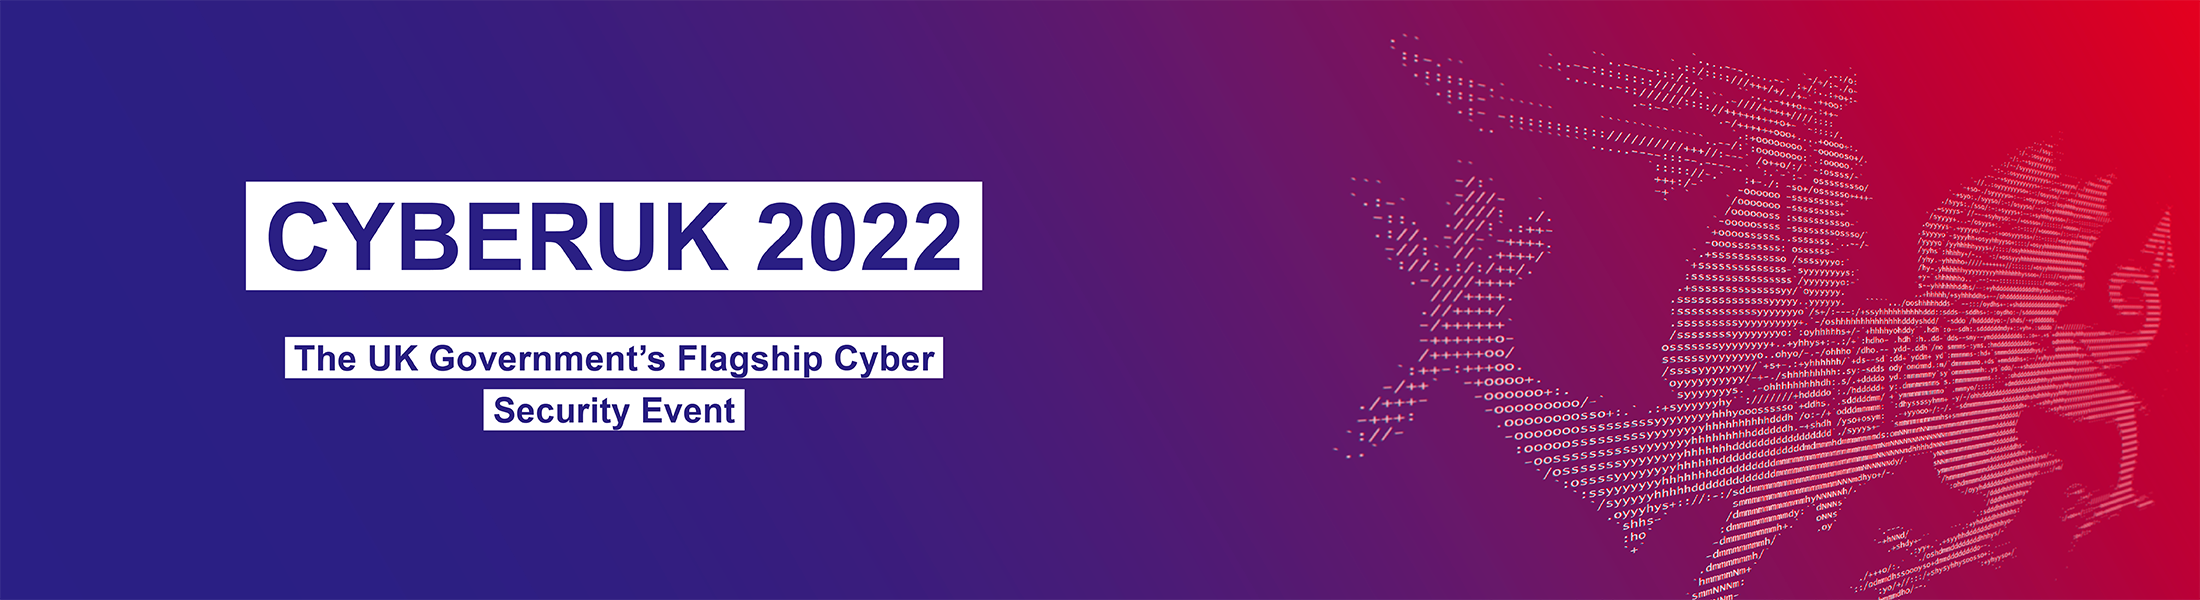 CYBERUK 2022 - The UK Government's Flagship Cyber Security Event